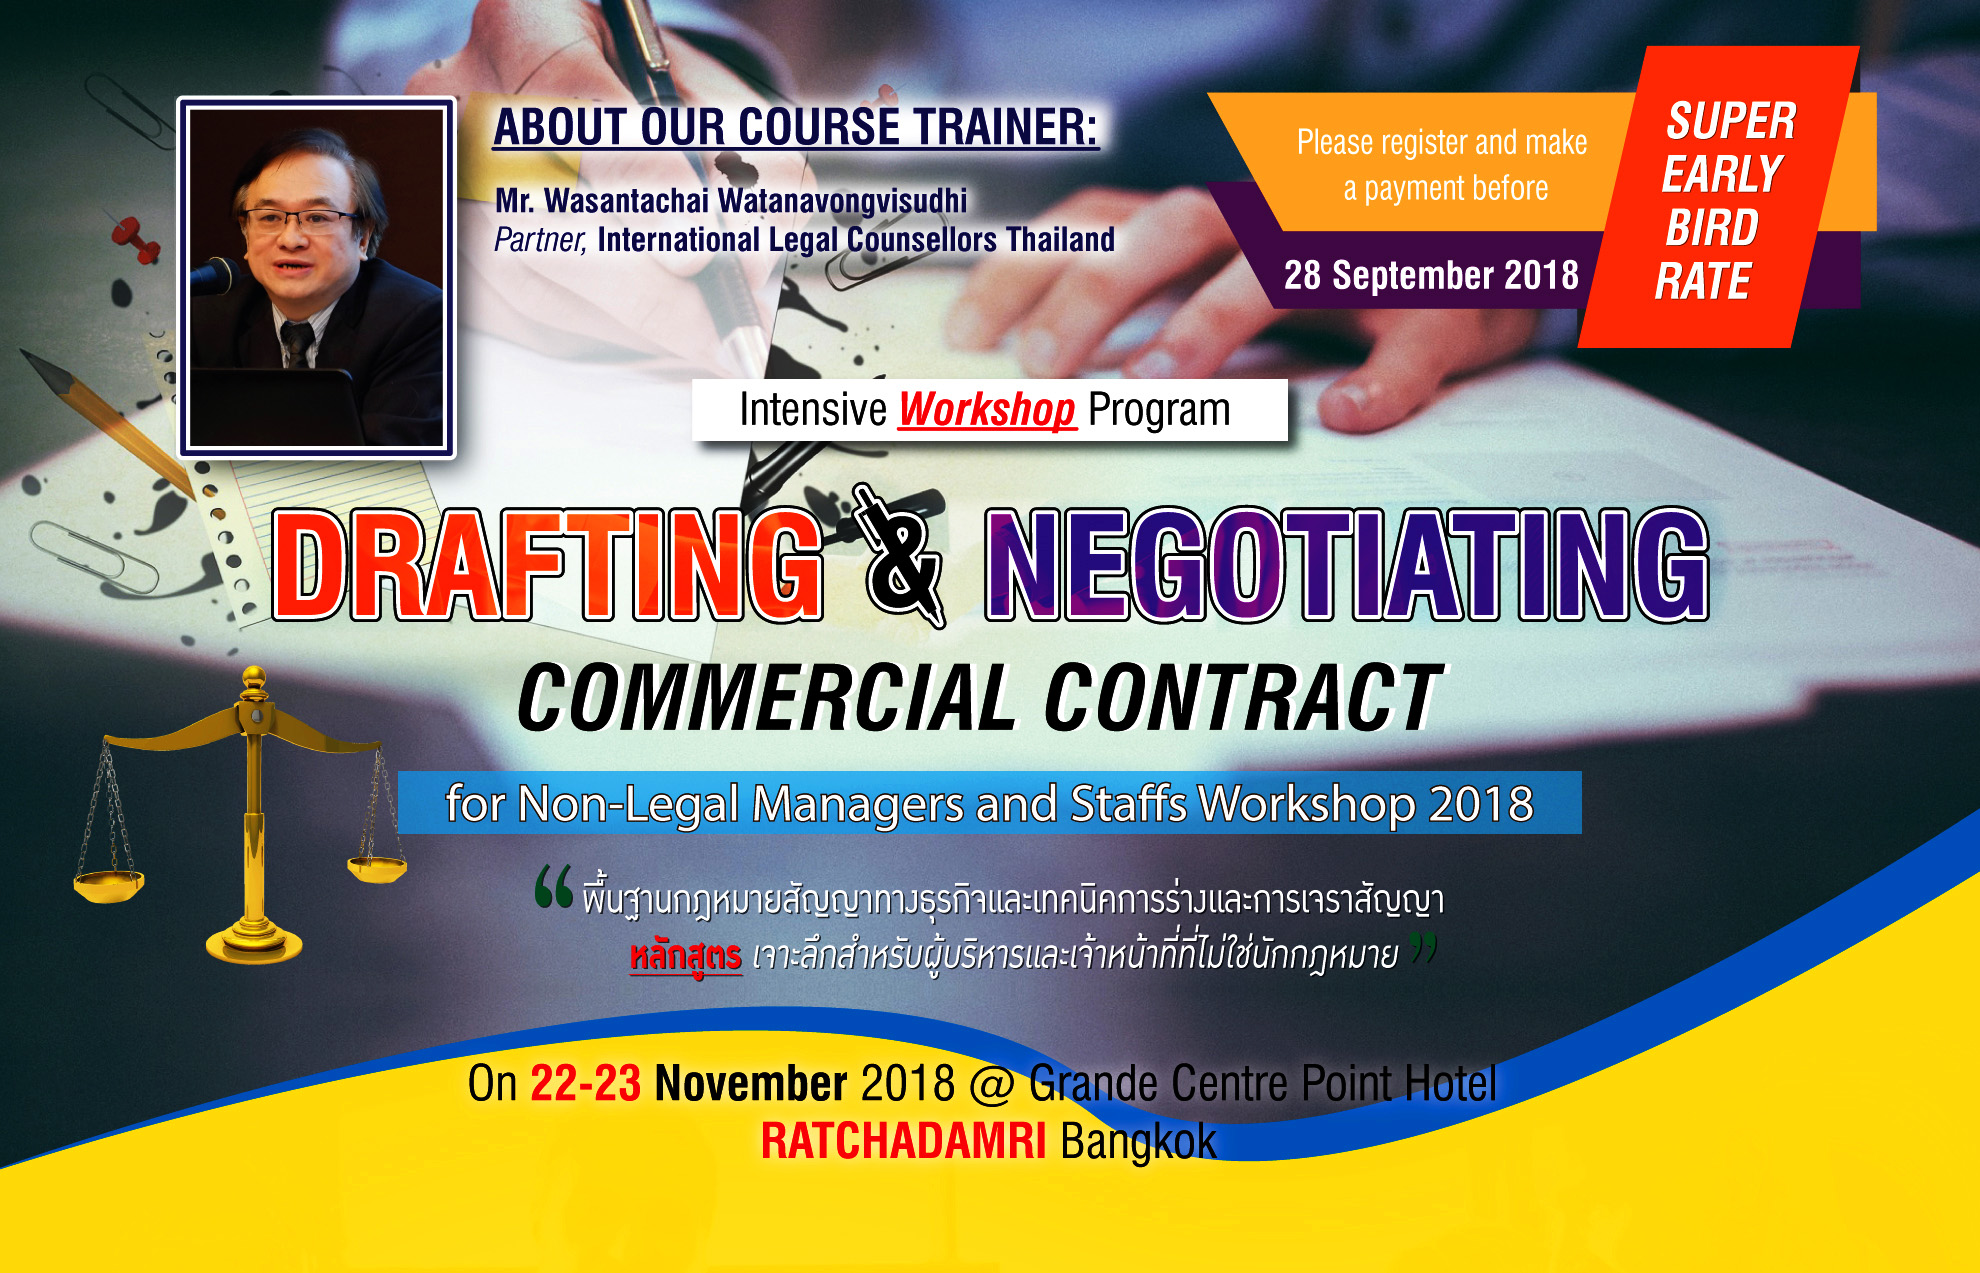 Drafting & Negotiating Commercial Contract for Non-Legal Managers and Staffs Workshop 2018